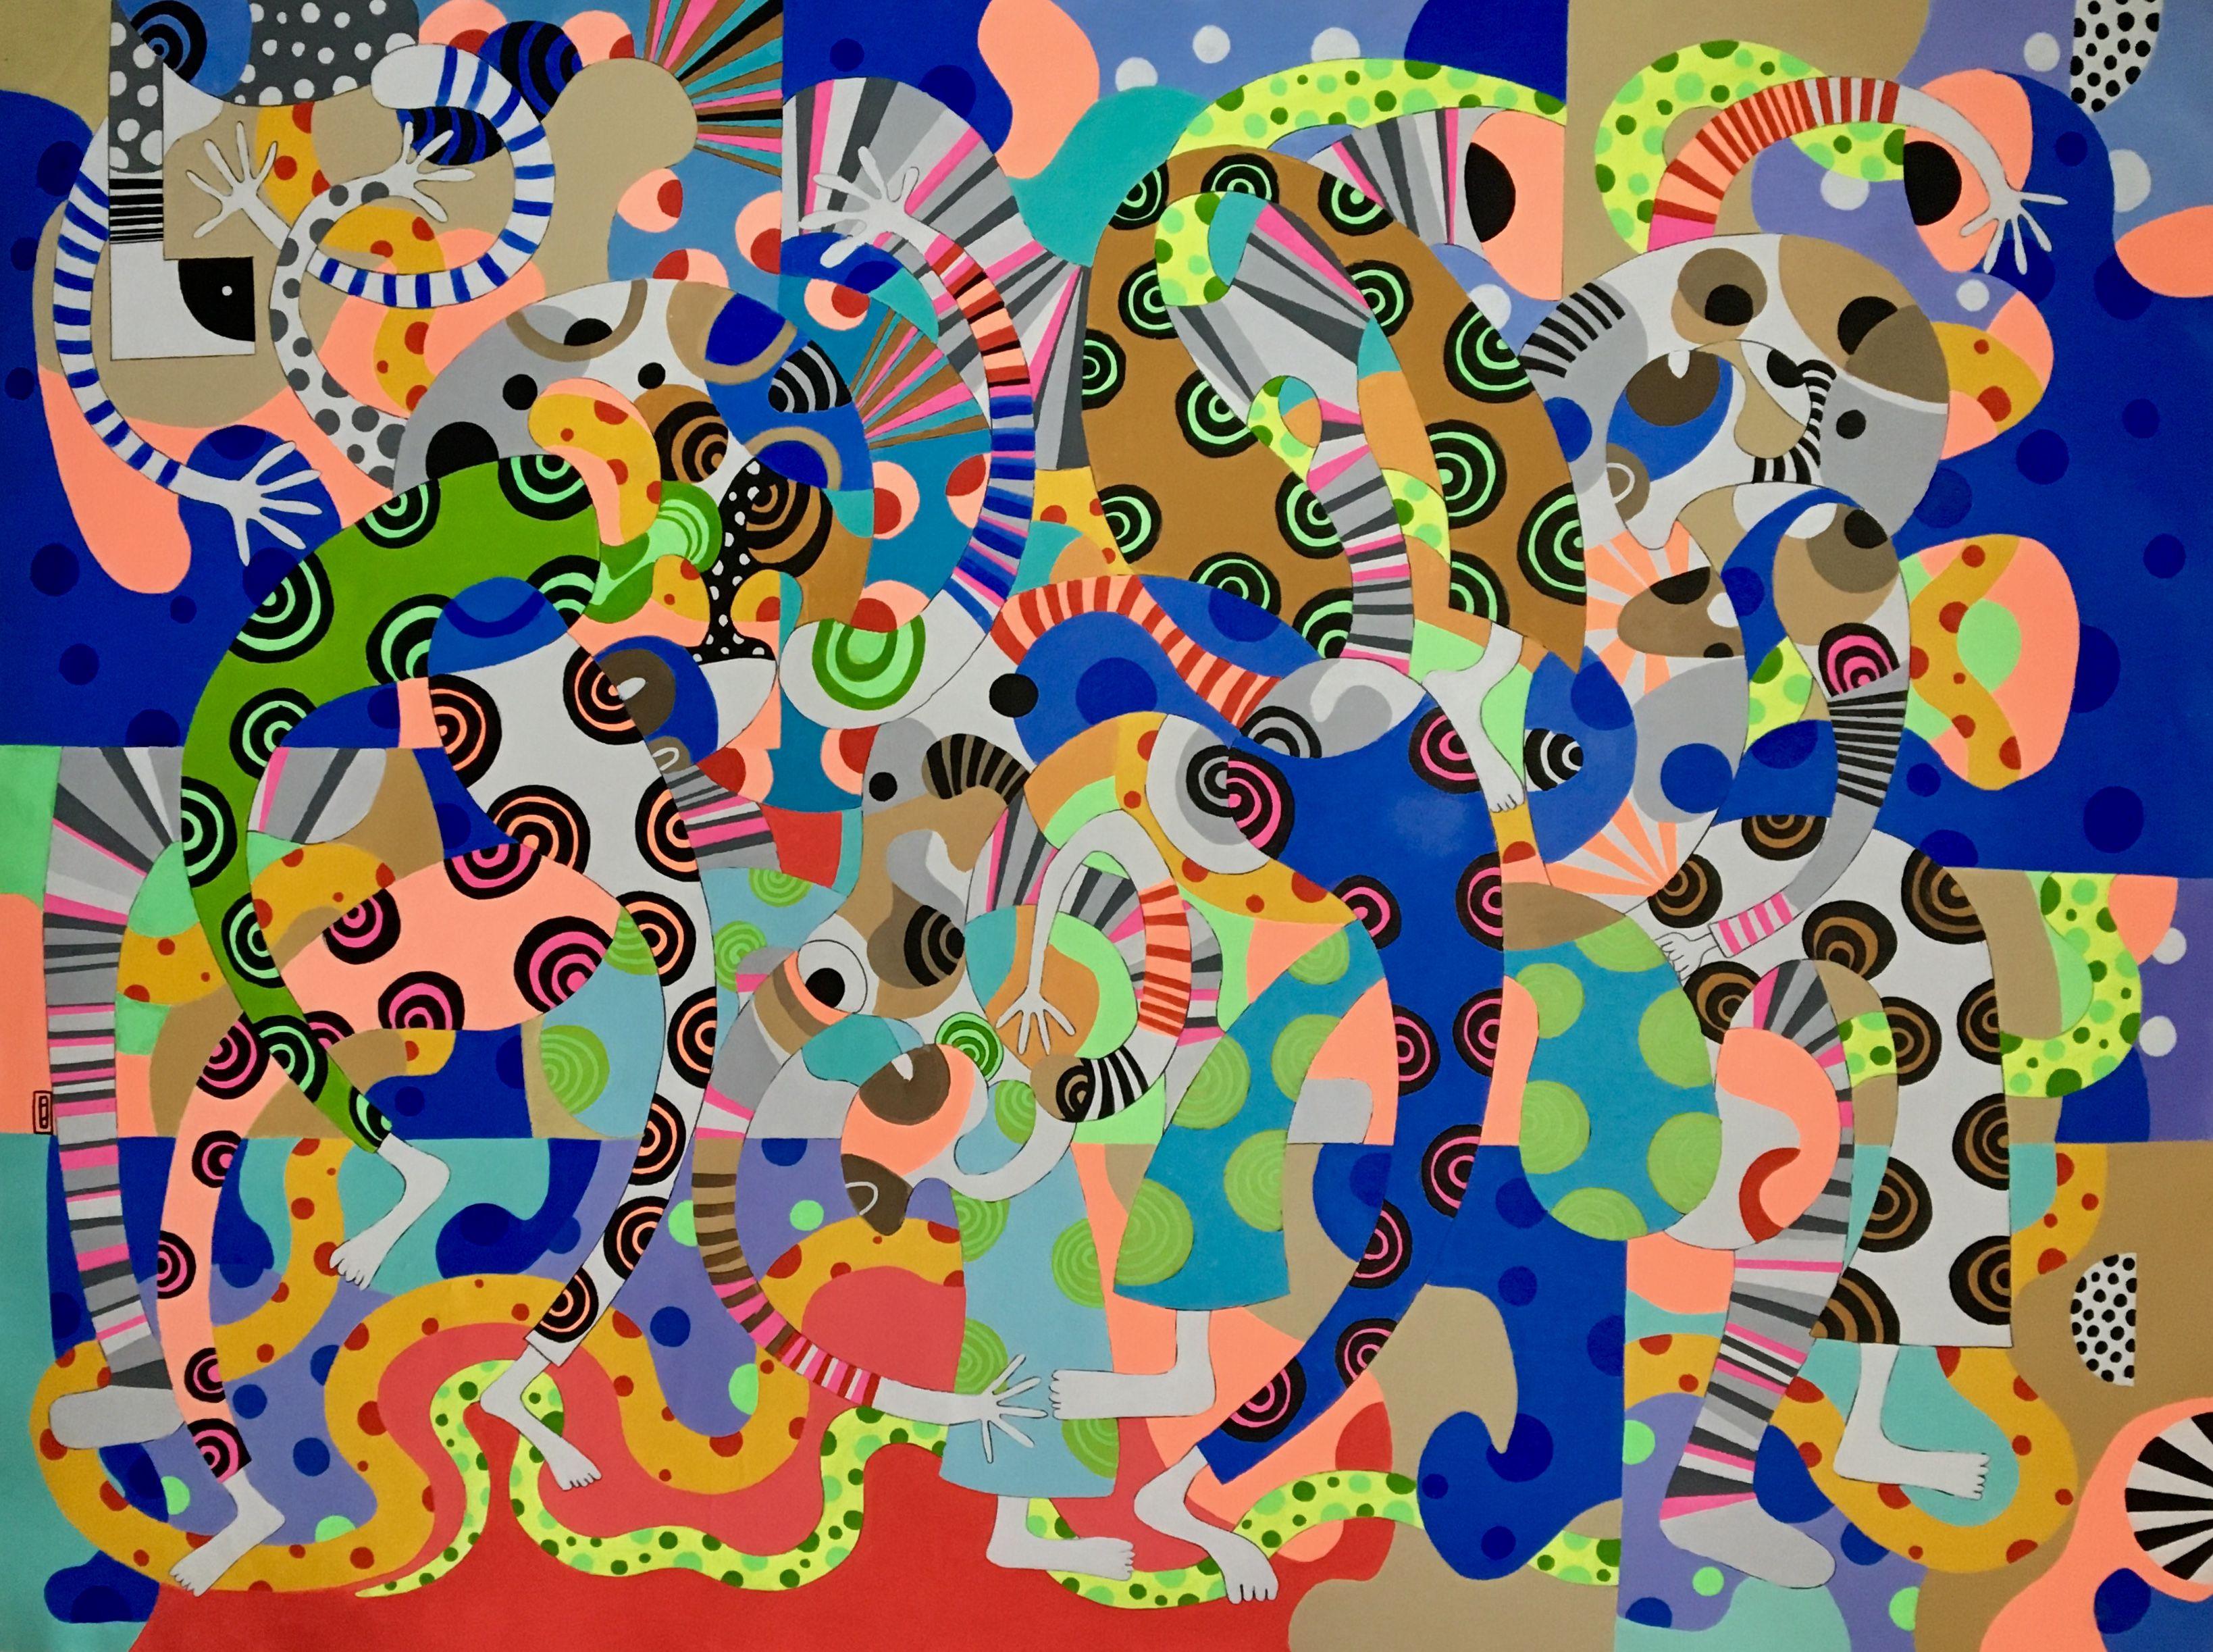 acrylic painting on the canvas inspired by african, and contemporary art directions. CANVAS 191 expresses colorful composition of figures on abstract colorful background with dots. Painting inspired mainly by Mexican culture. Beside mexican culture